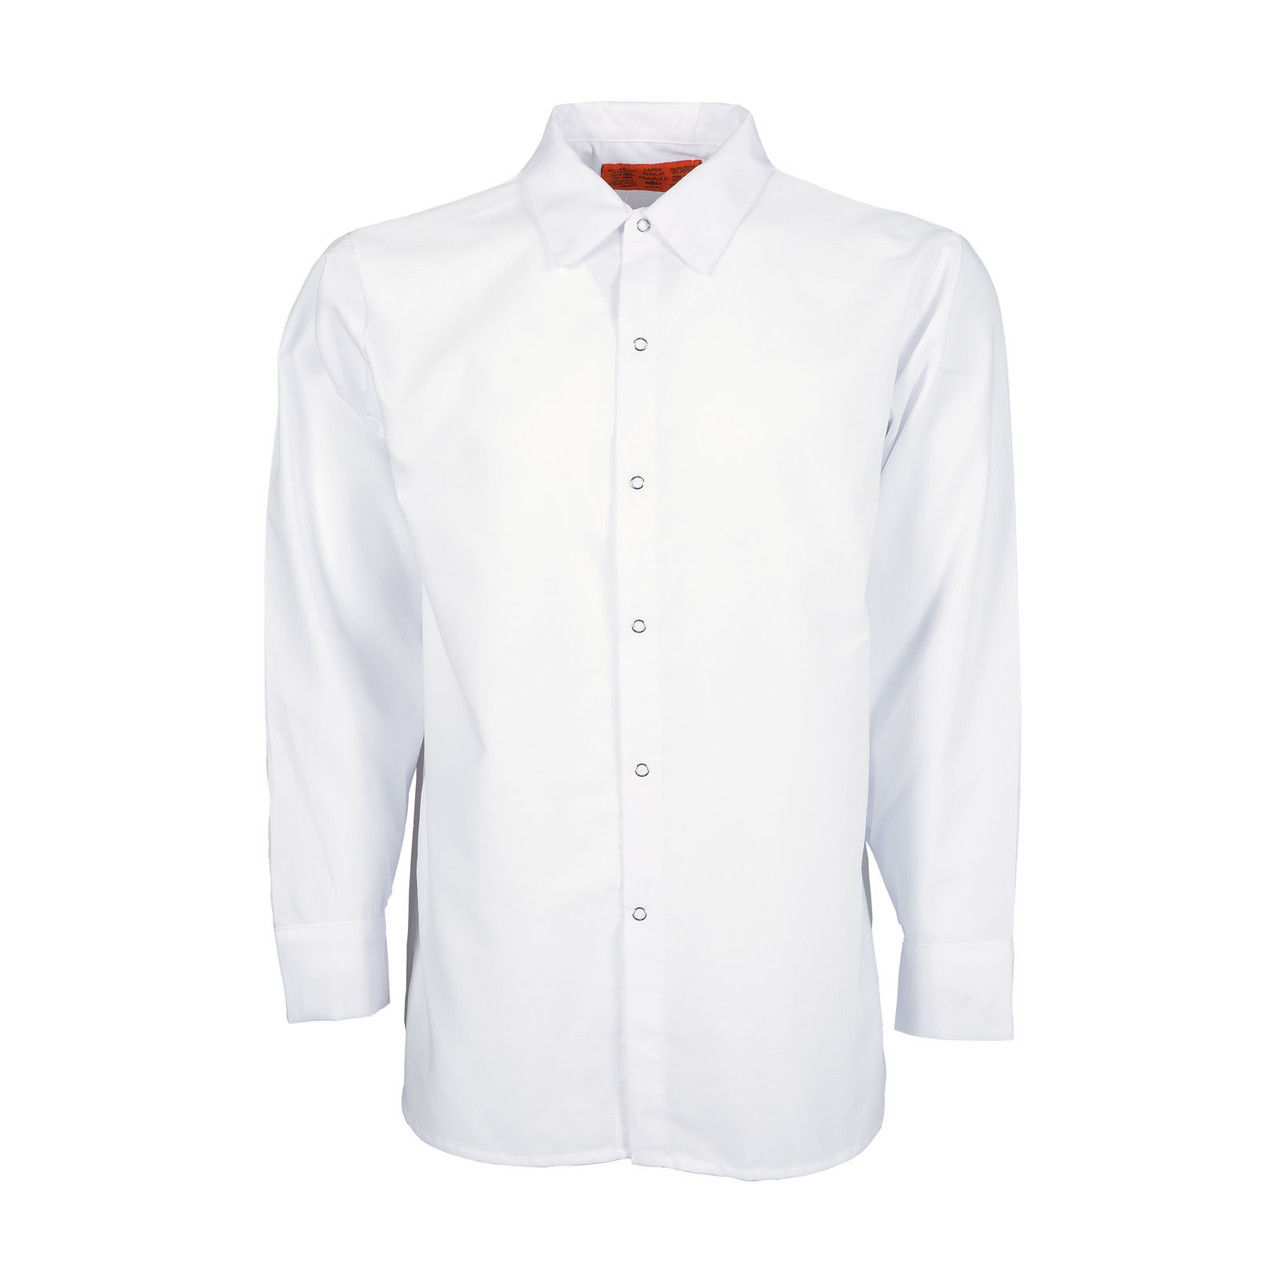 What are the quality and durability features of white work shirts mens?